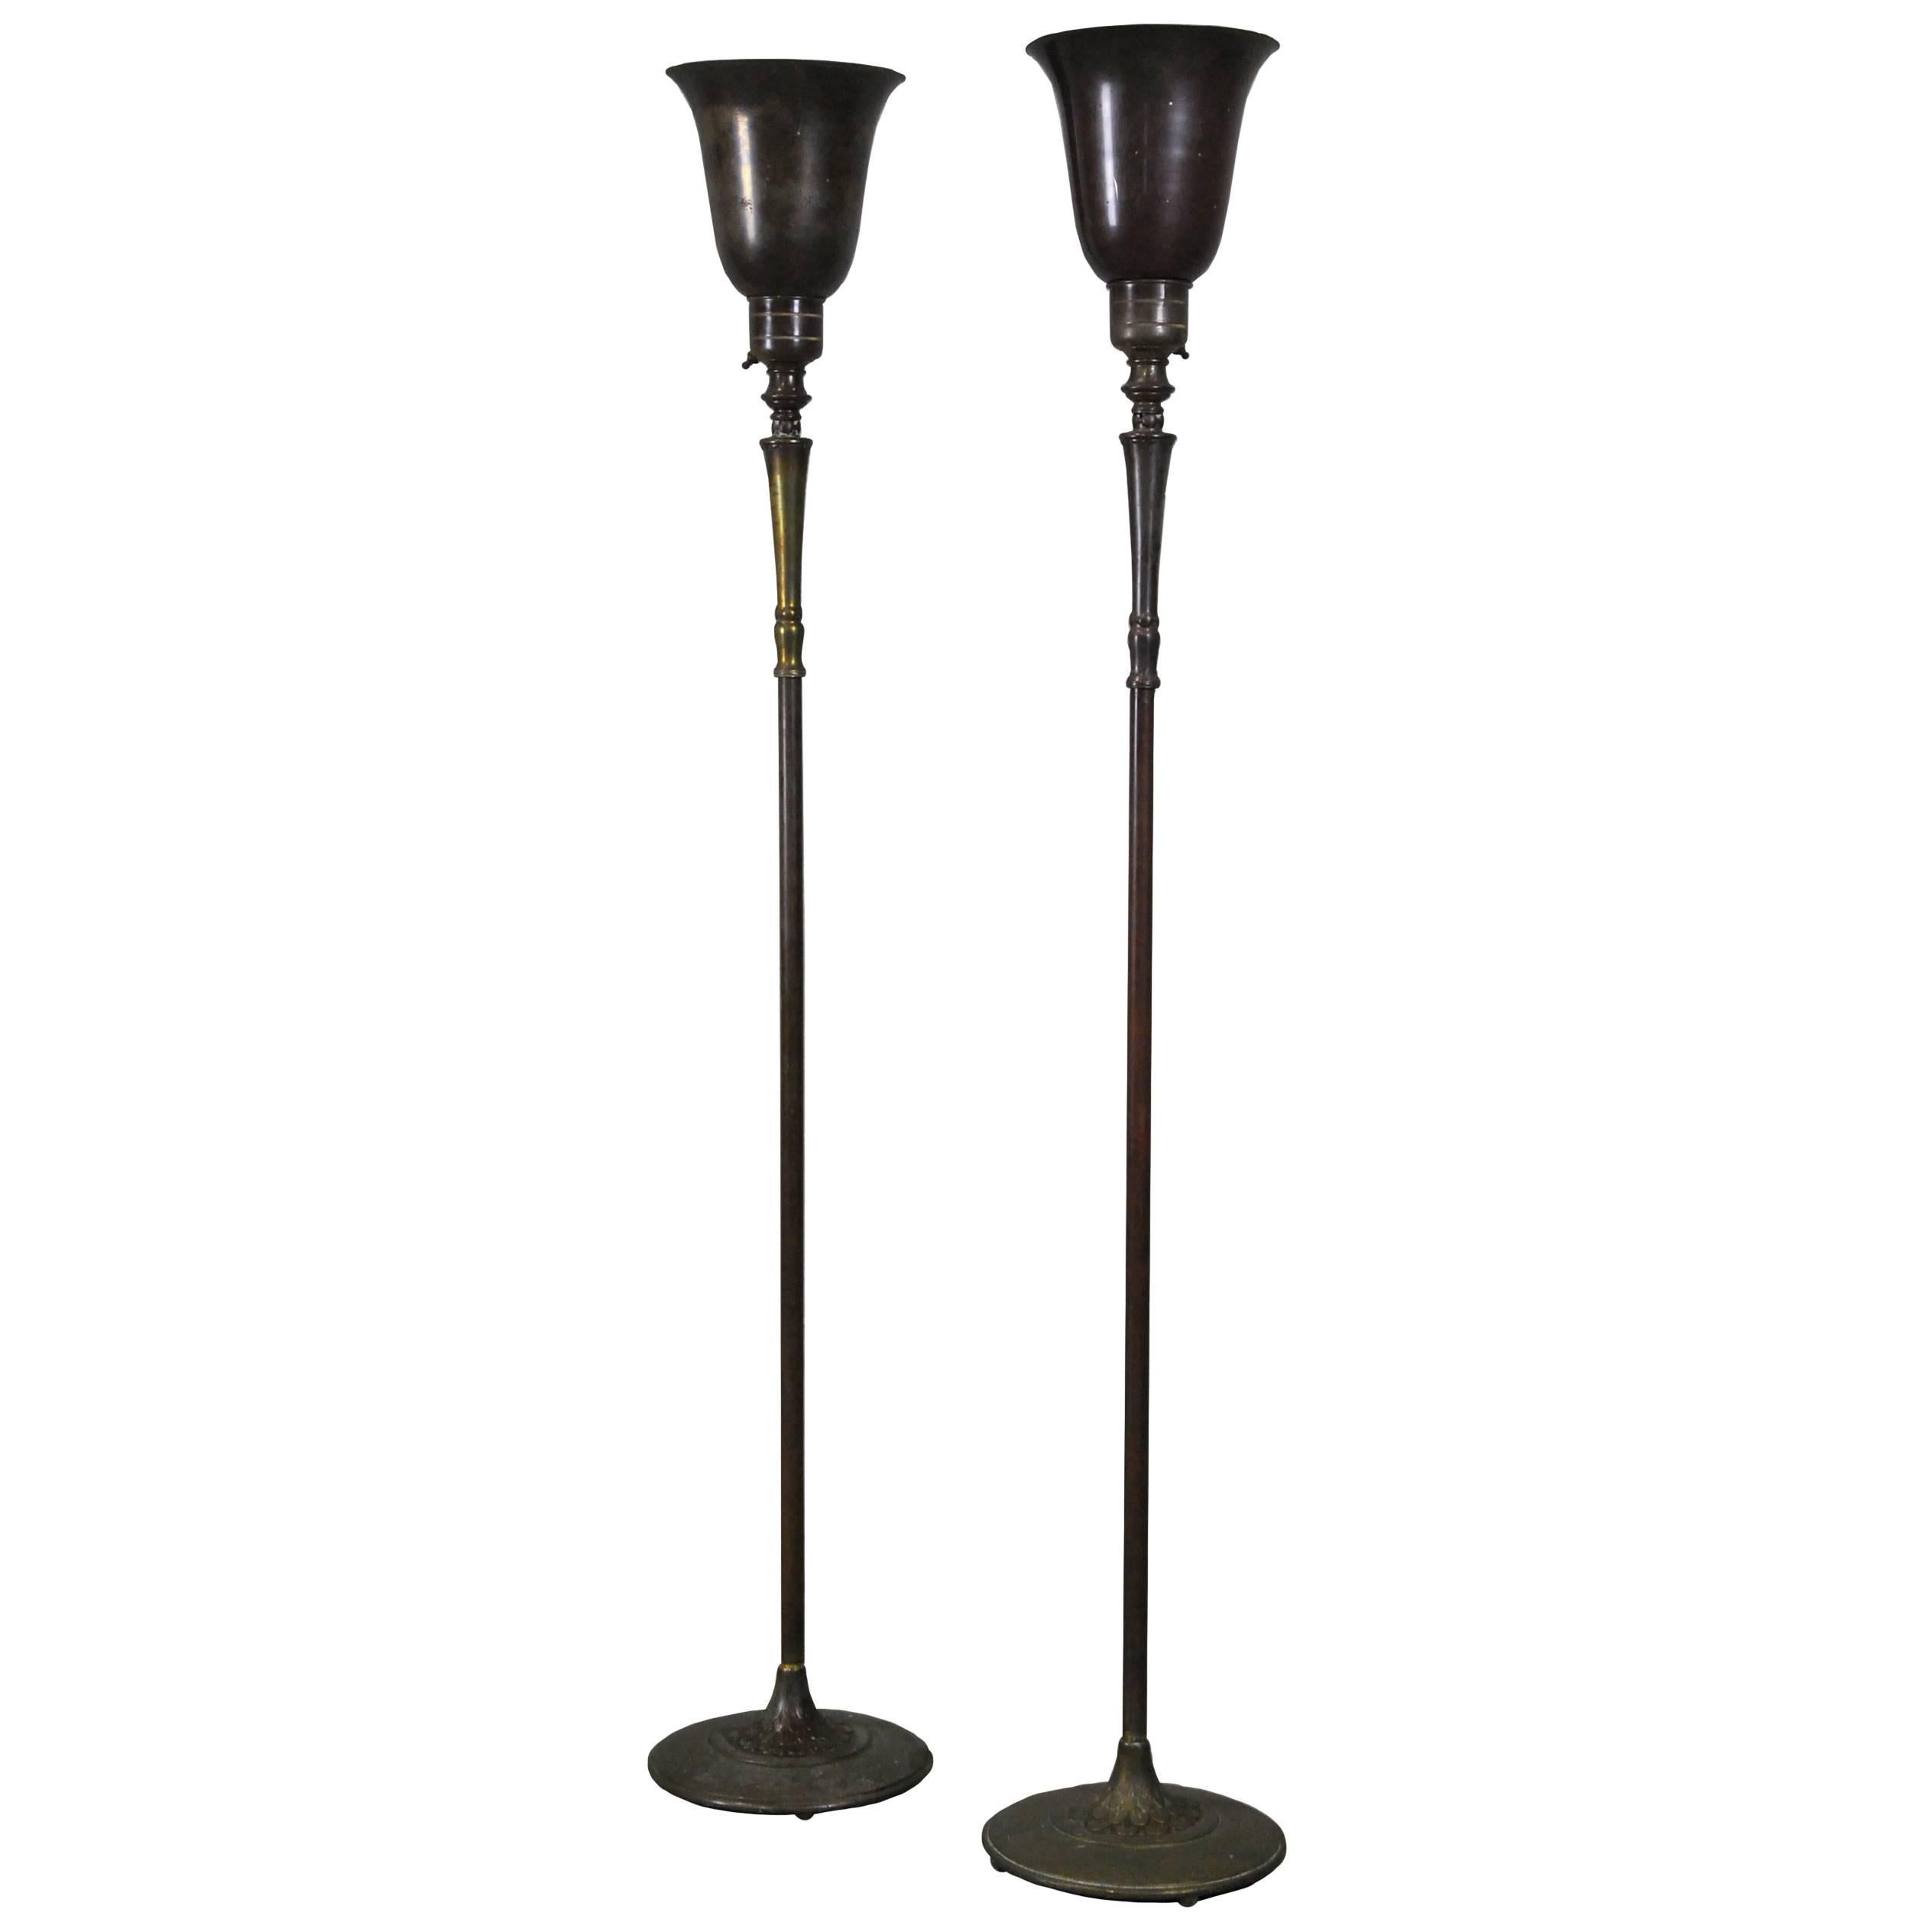 1930 Pair of Brass Torchiere Floor Lamps, MSLC